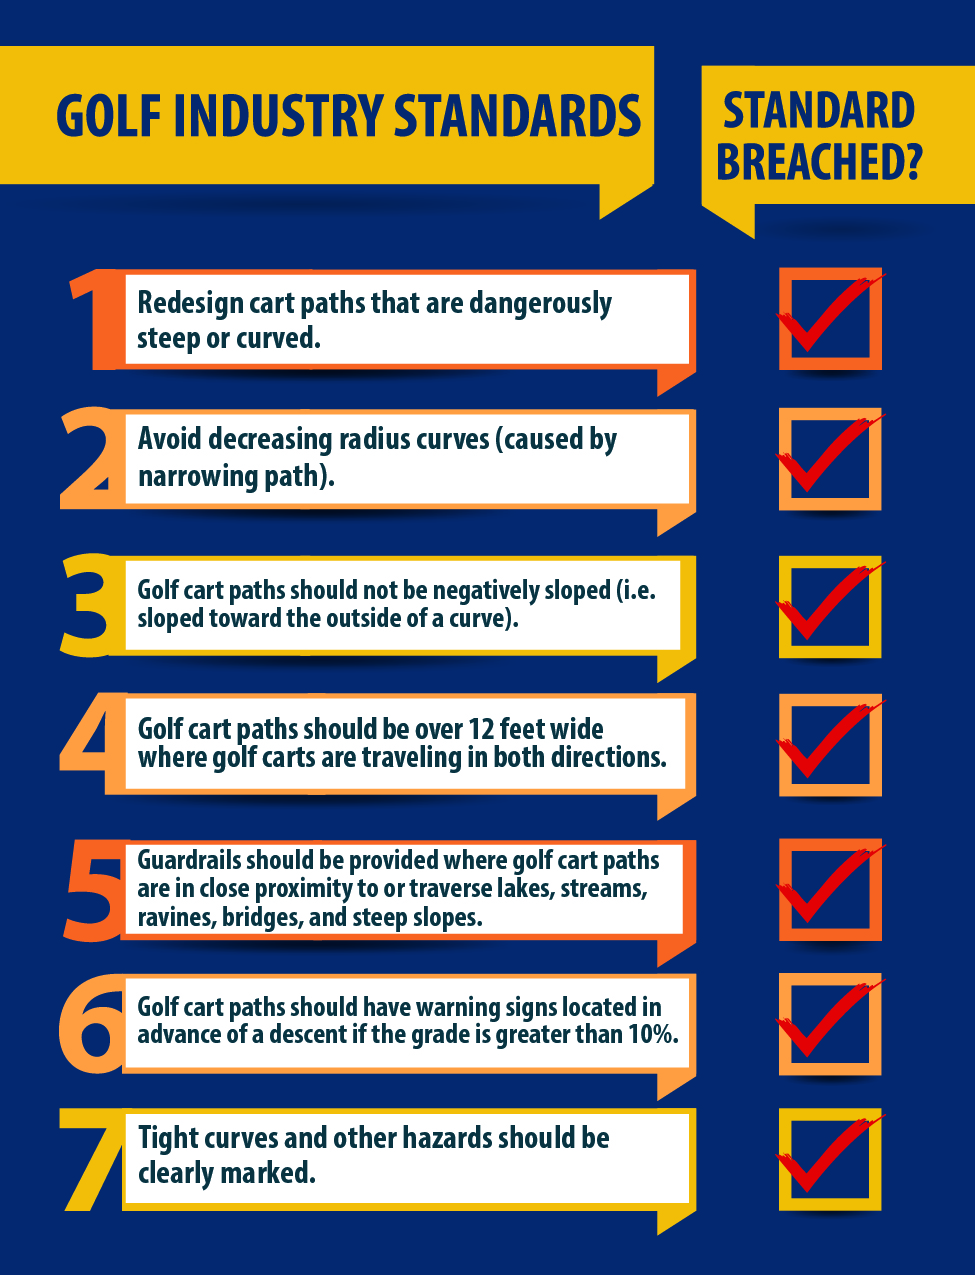 Chart listing golf industry standards used to show breach of duty